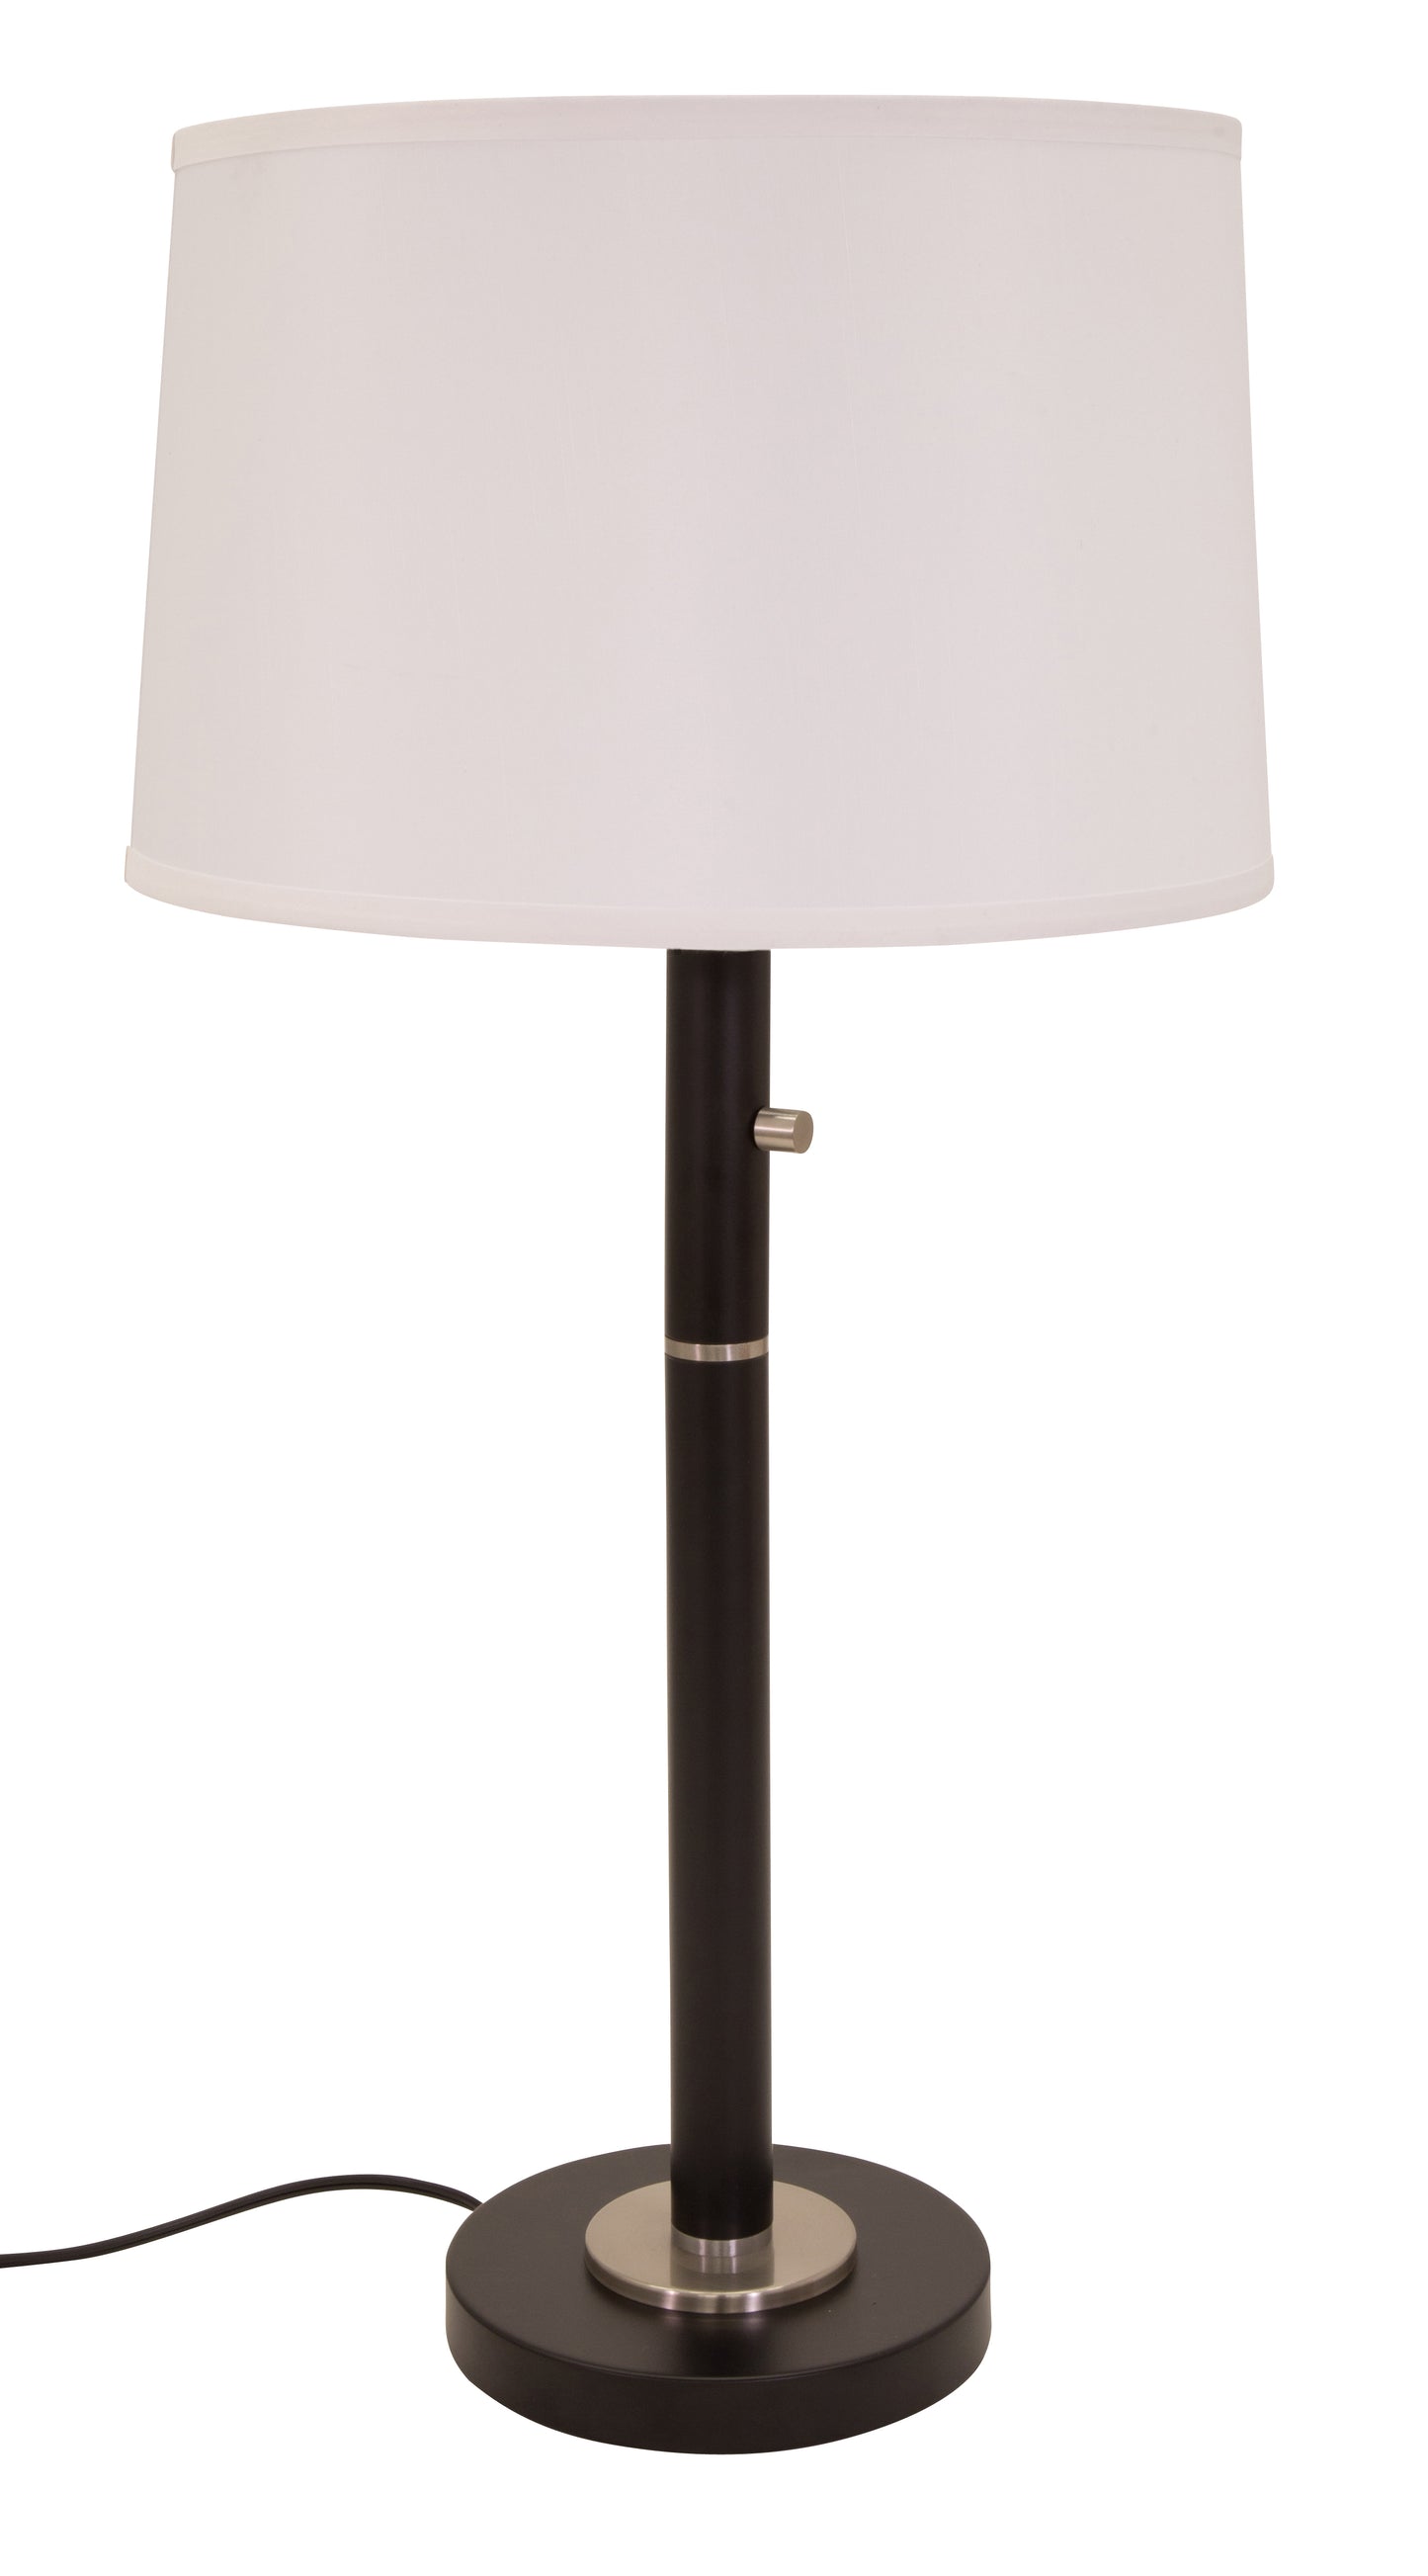 House of Troy Rupert 3-Way Table Lamp Black Satin Nickel Accents USB Port RU750-BLK